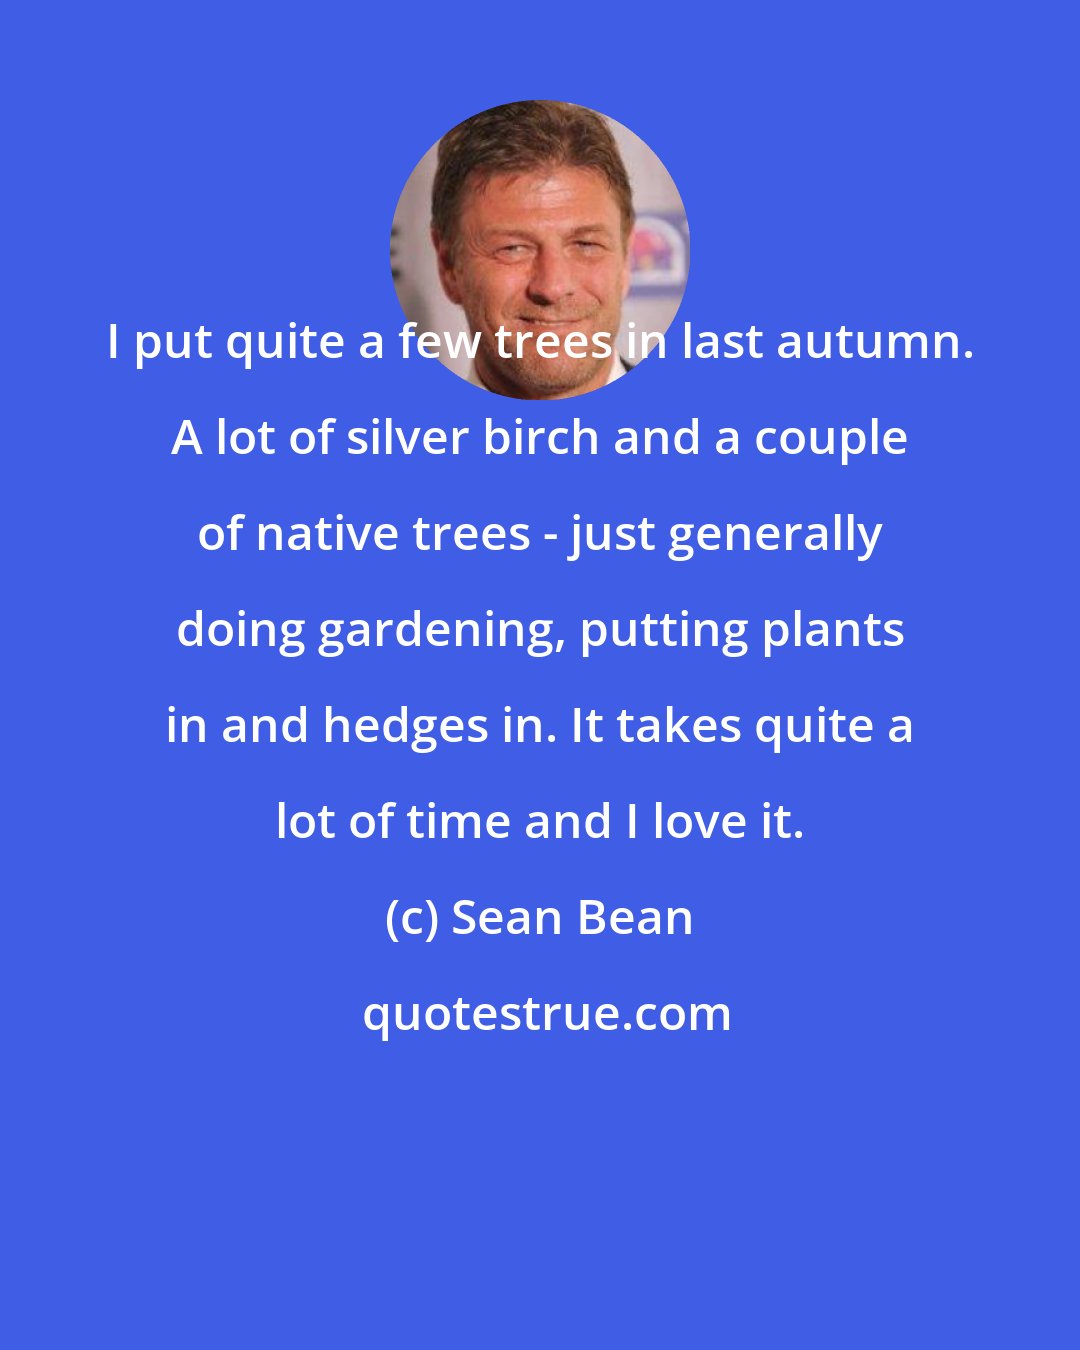 Sean Bean: I put quite a few trees in last autumn. A lot of silver birch and a couple of native trees - just generally doing gardening, putting plants in and hedges in. It takes quite a lot of time and I love it.